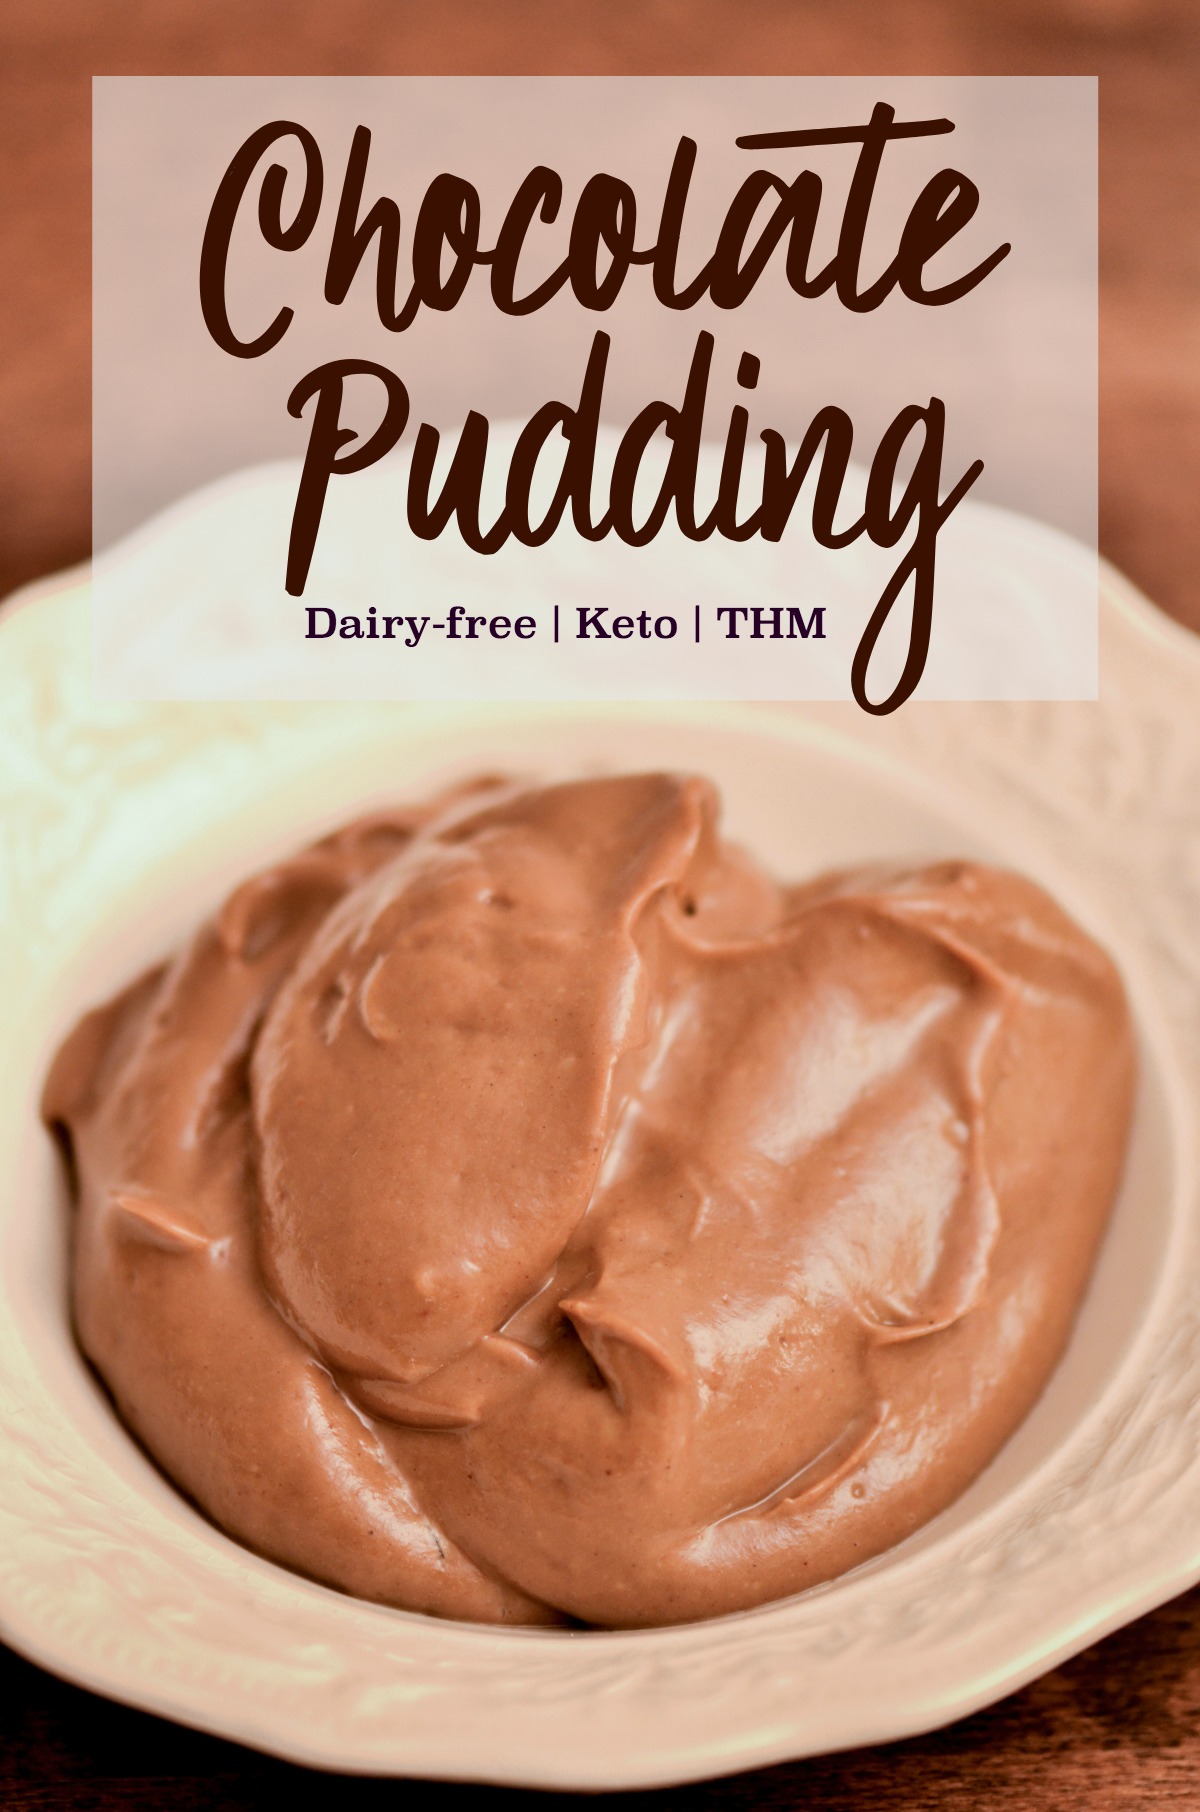 Dairy-free creamy chocolate pudding that is on plan with Trim Healthy Mama and Keto